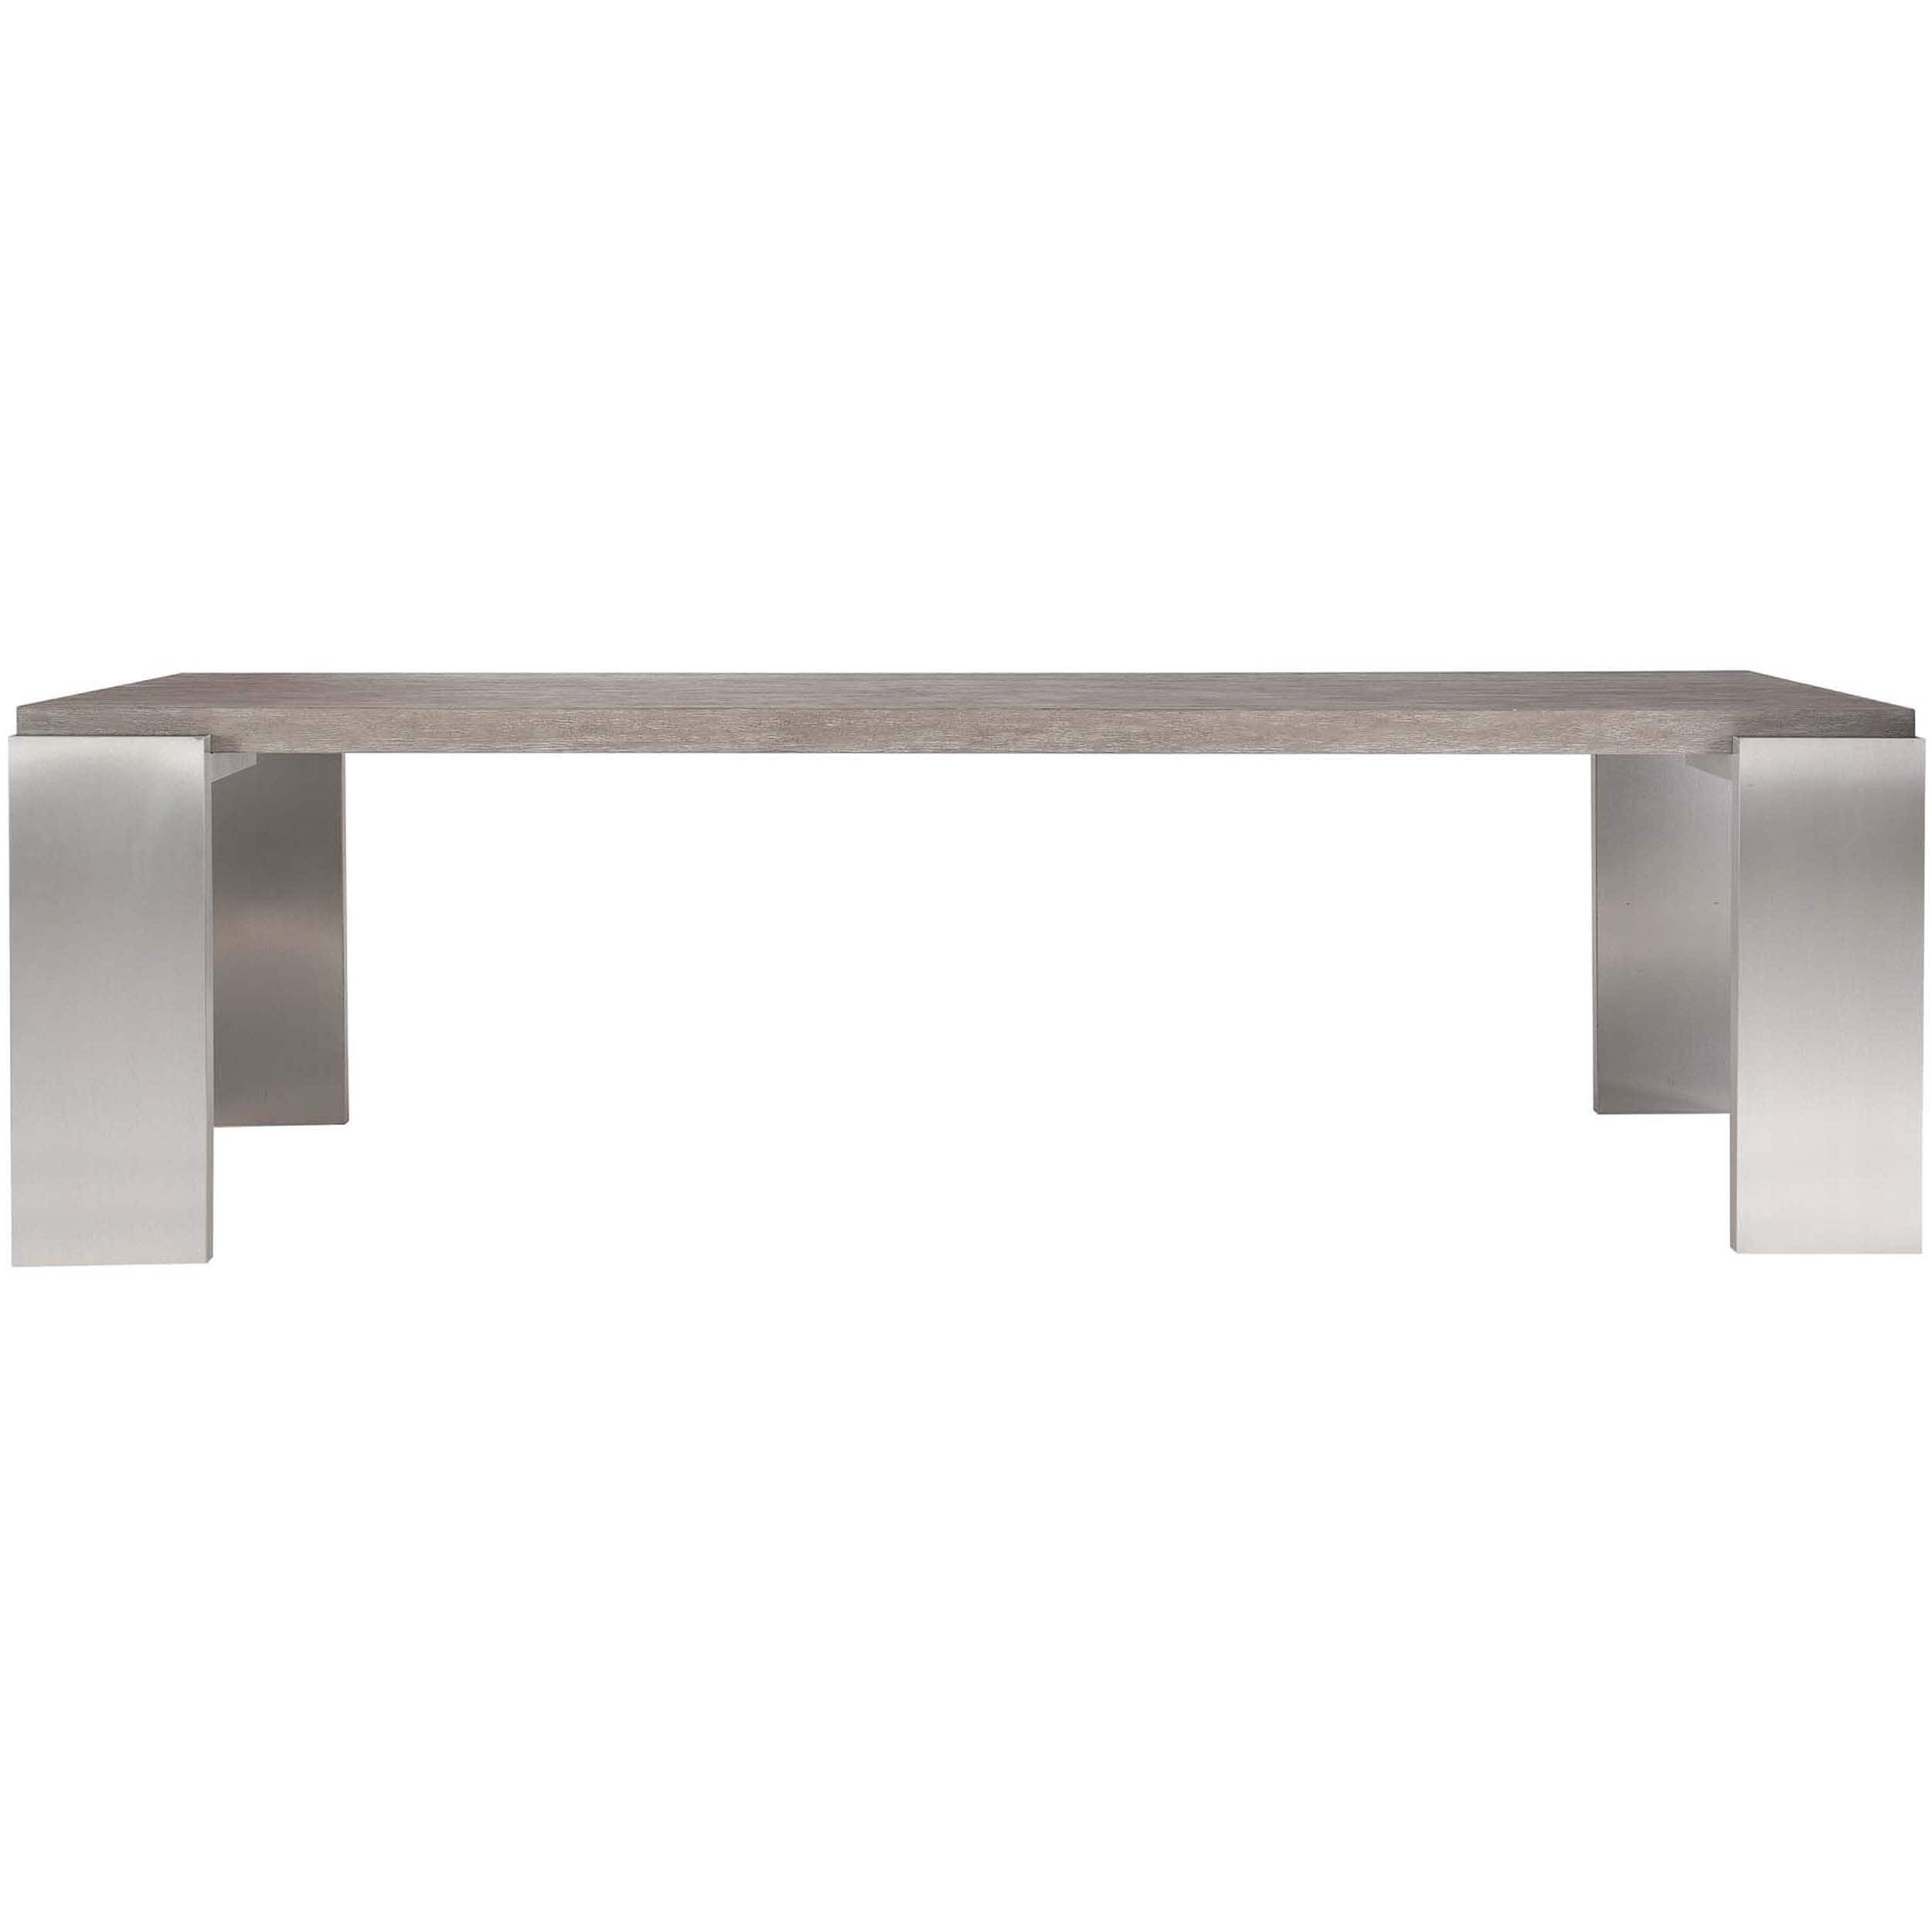 Image of Foundations Rectangular Dining Table